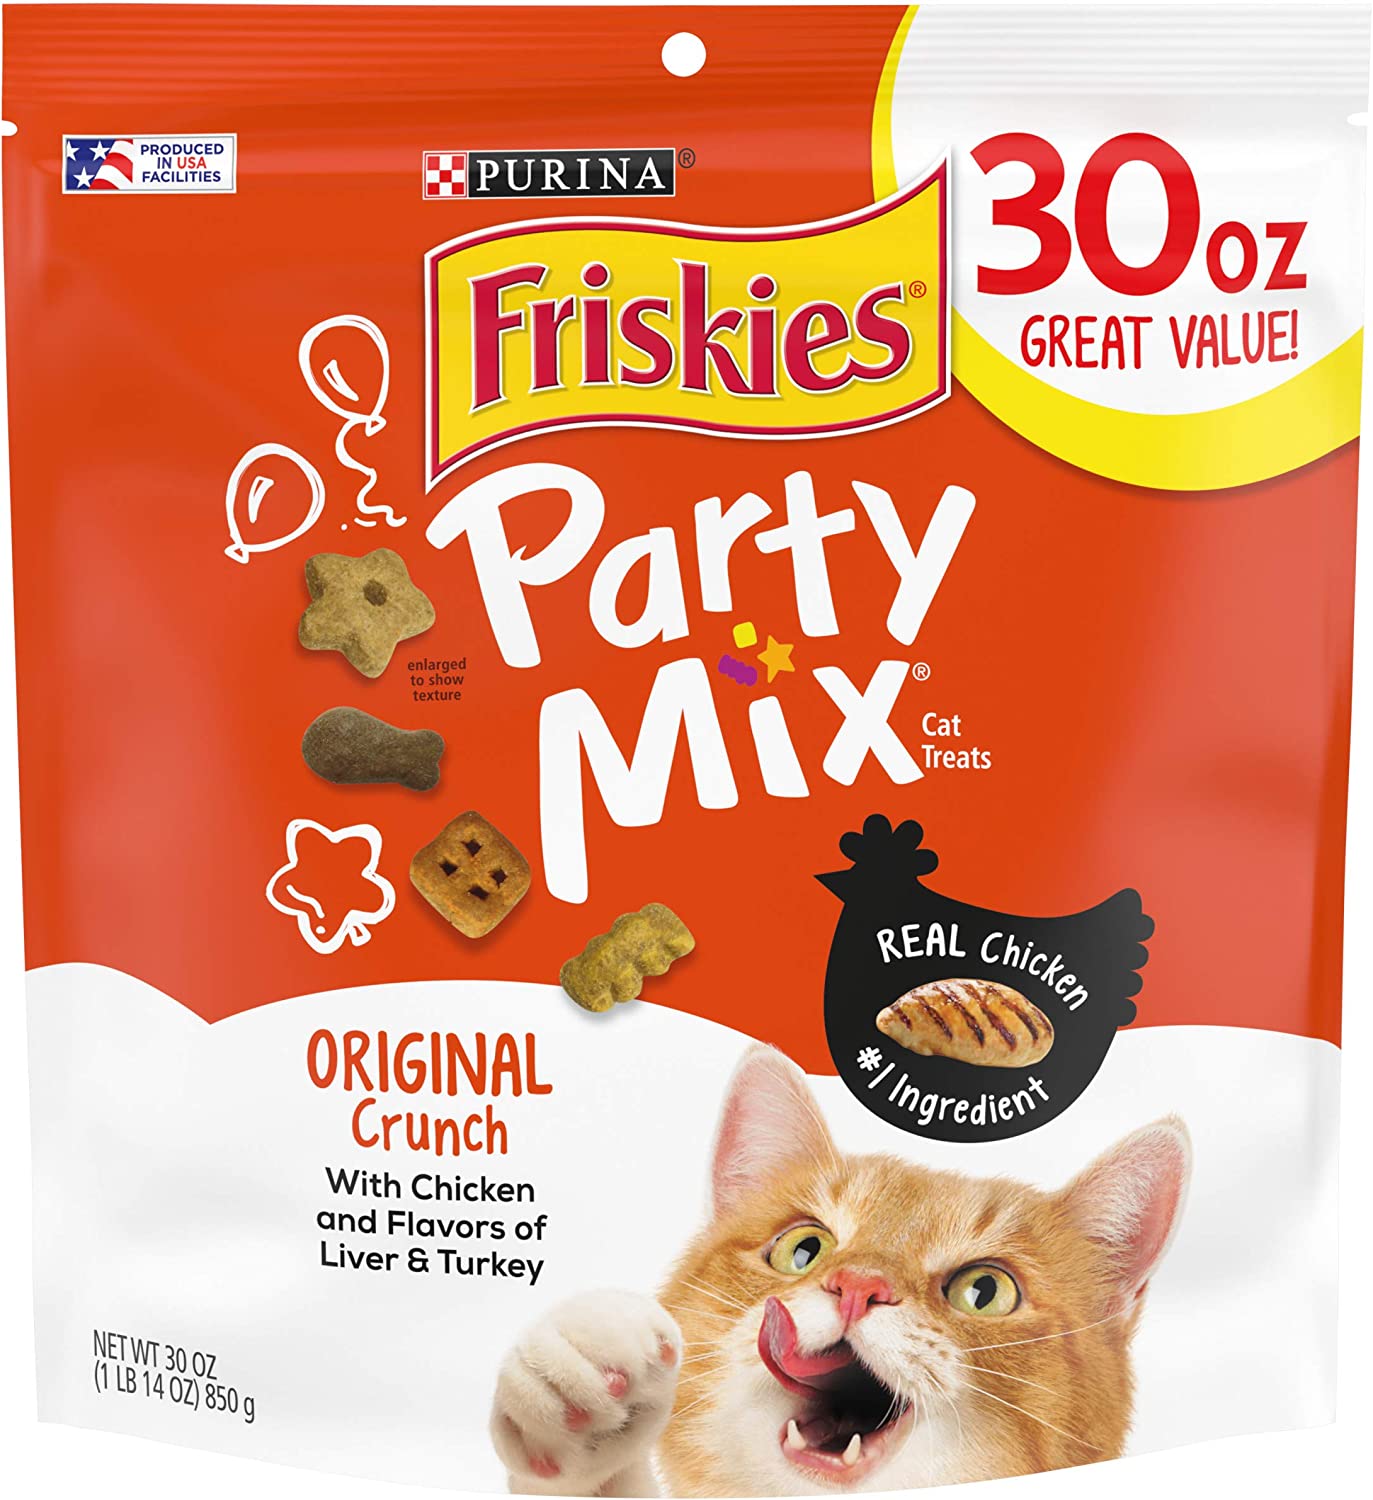 Amazon price mistake? Four 30 oz pouches of Friskies cat treats, $13.47 or lower if coupon available